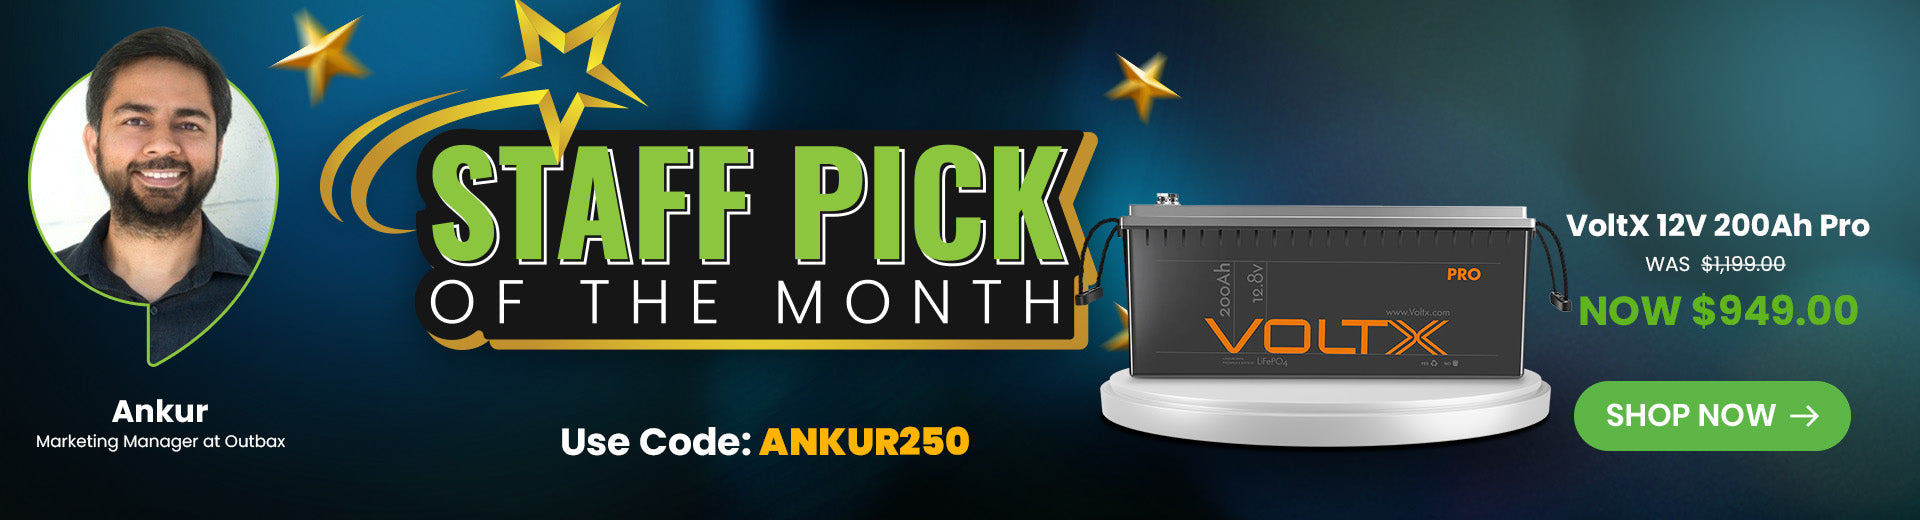 Ankur Staff Pick of the Month